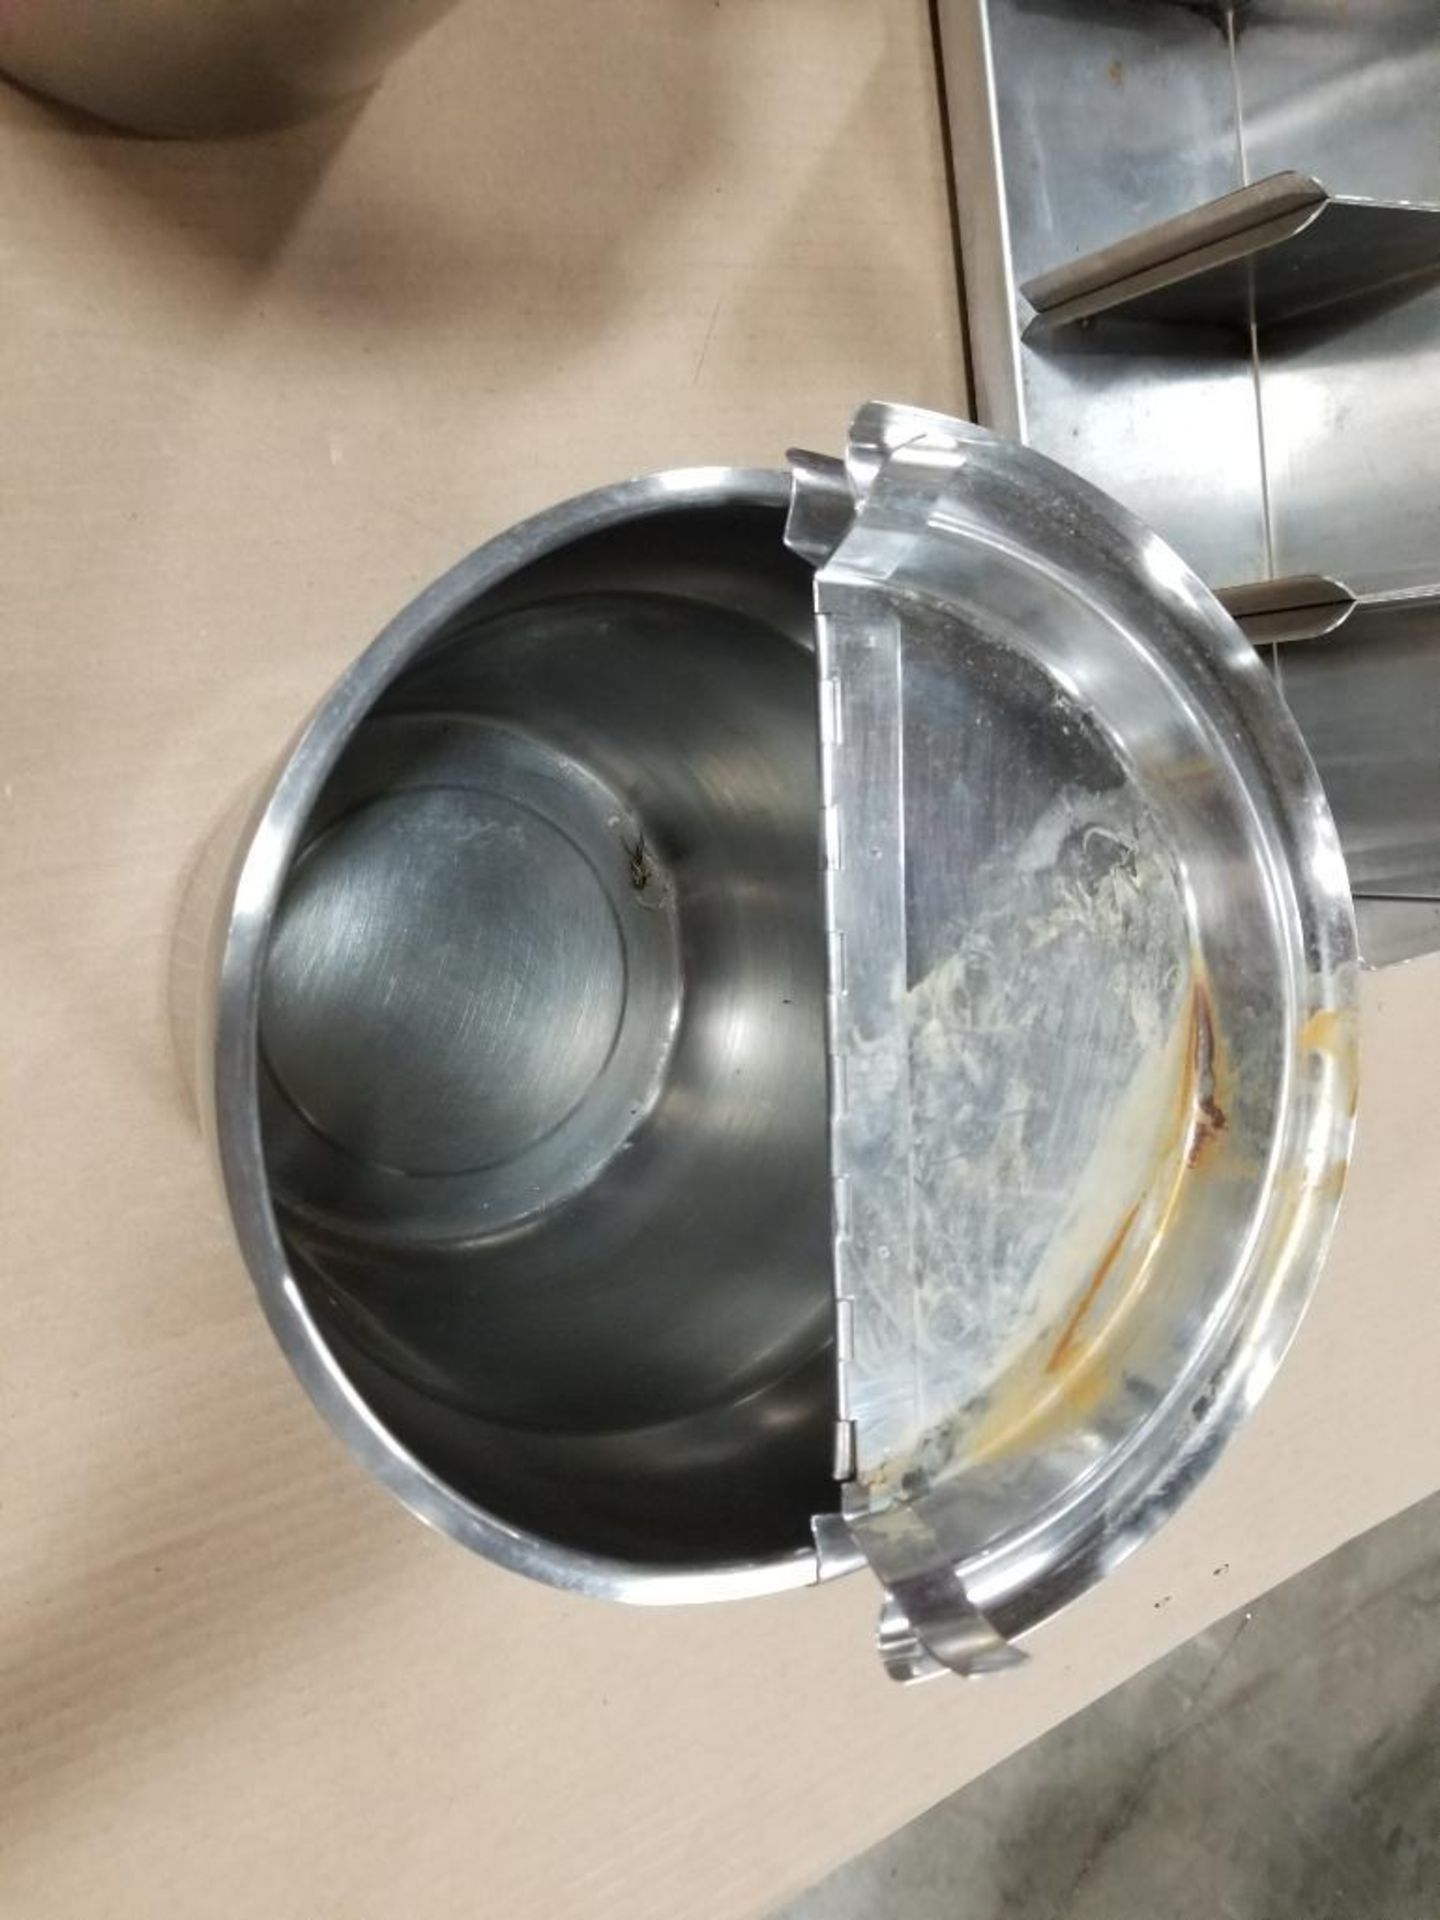 Stainless steel steam table and containers. - Image 2 of 16